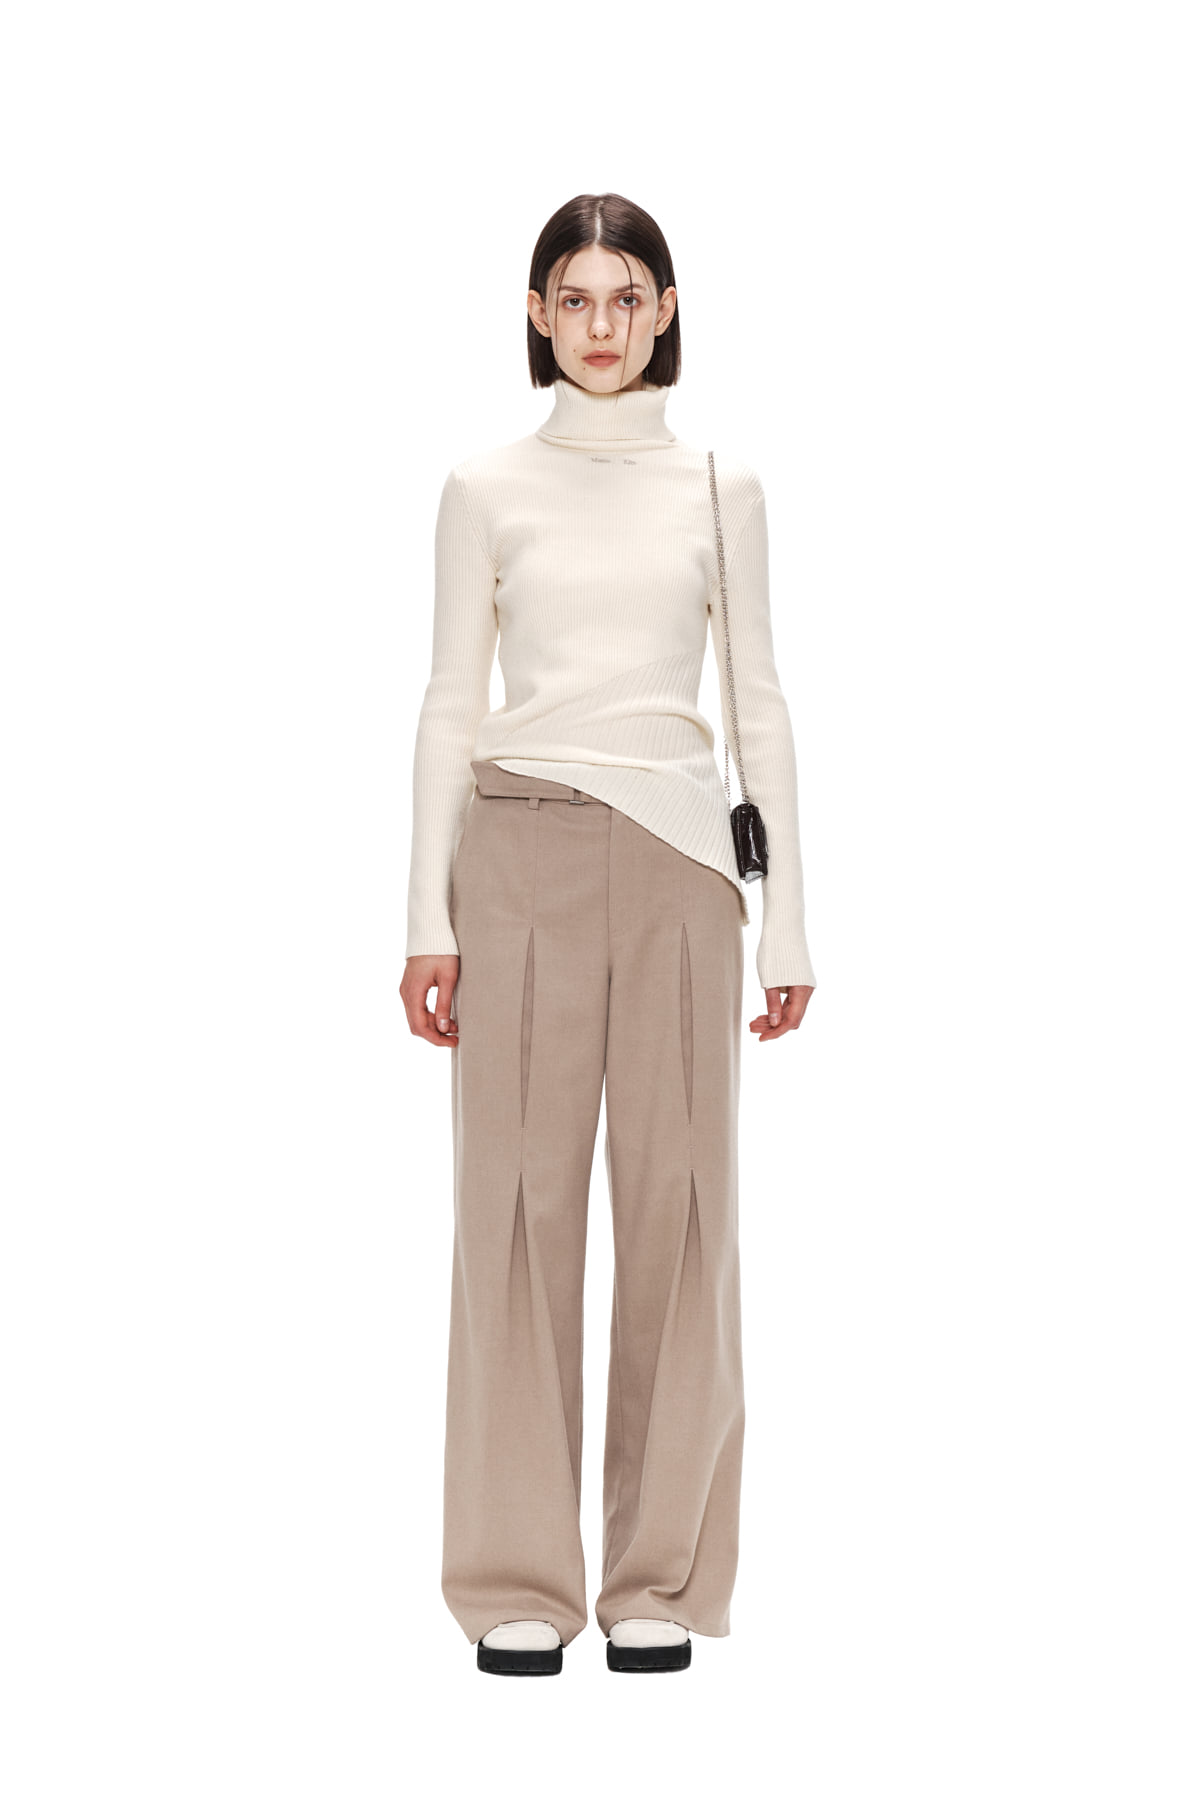 BELTED TUCK POINT TROUSER IN BEIGE